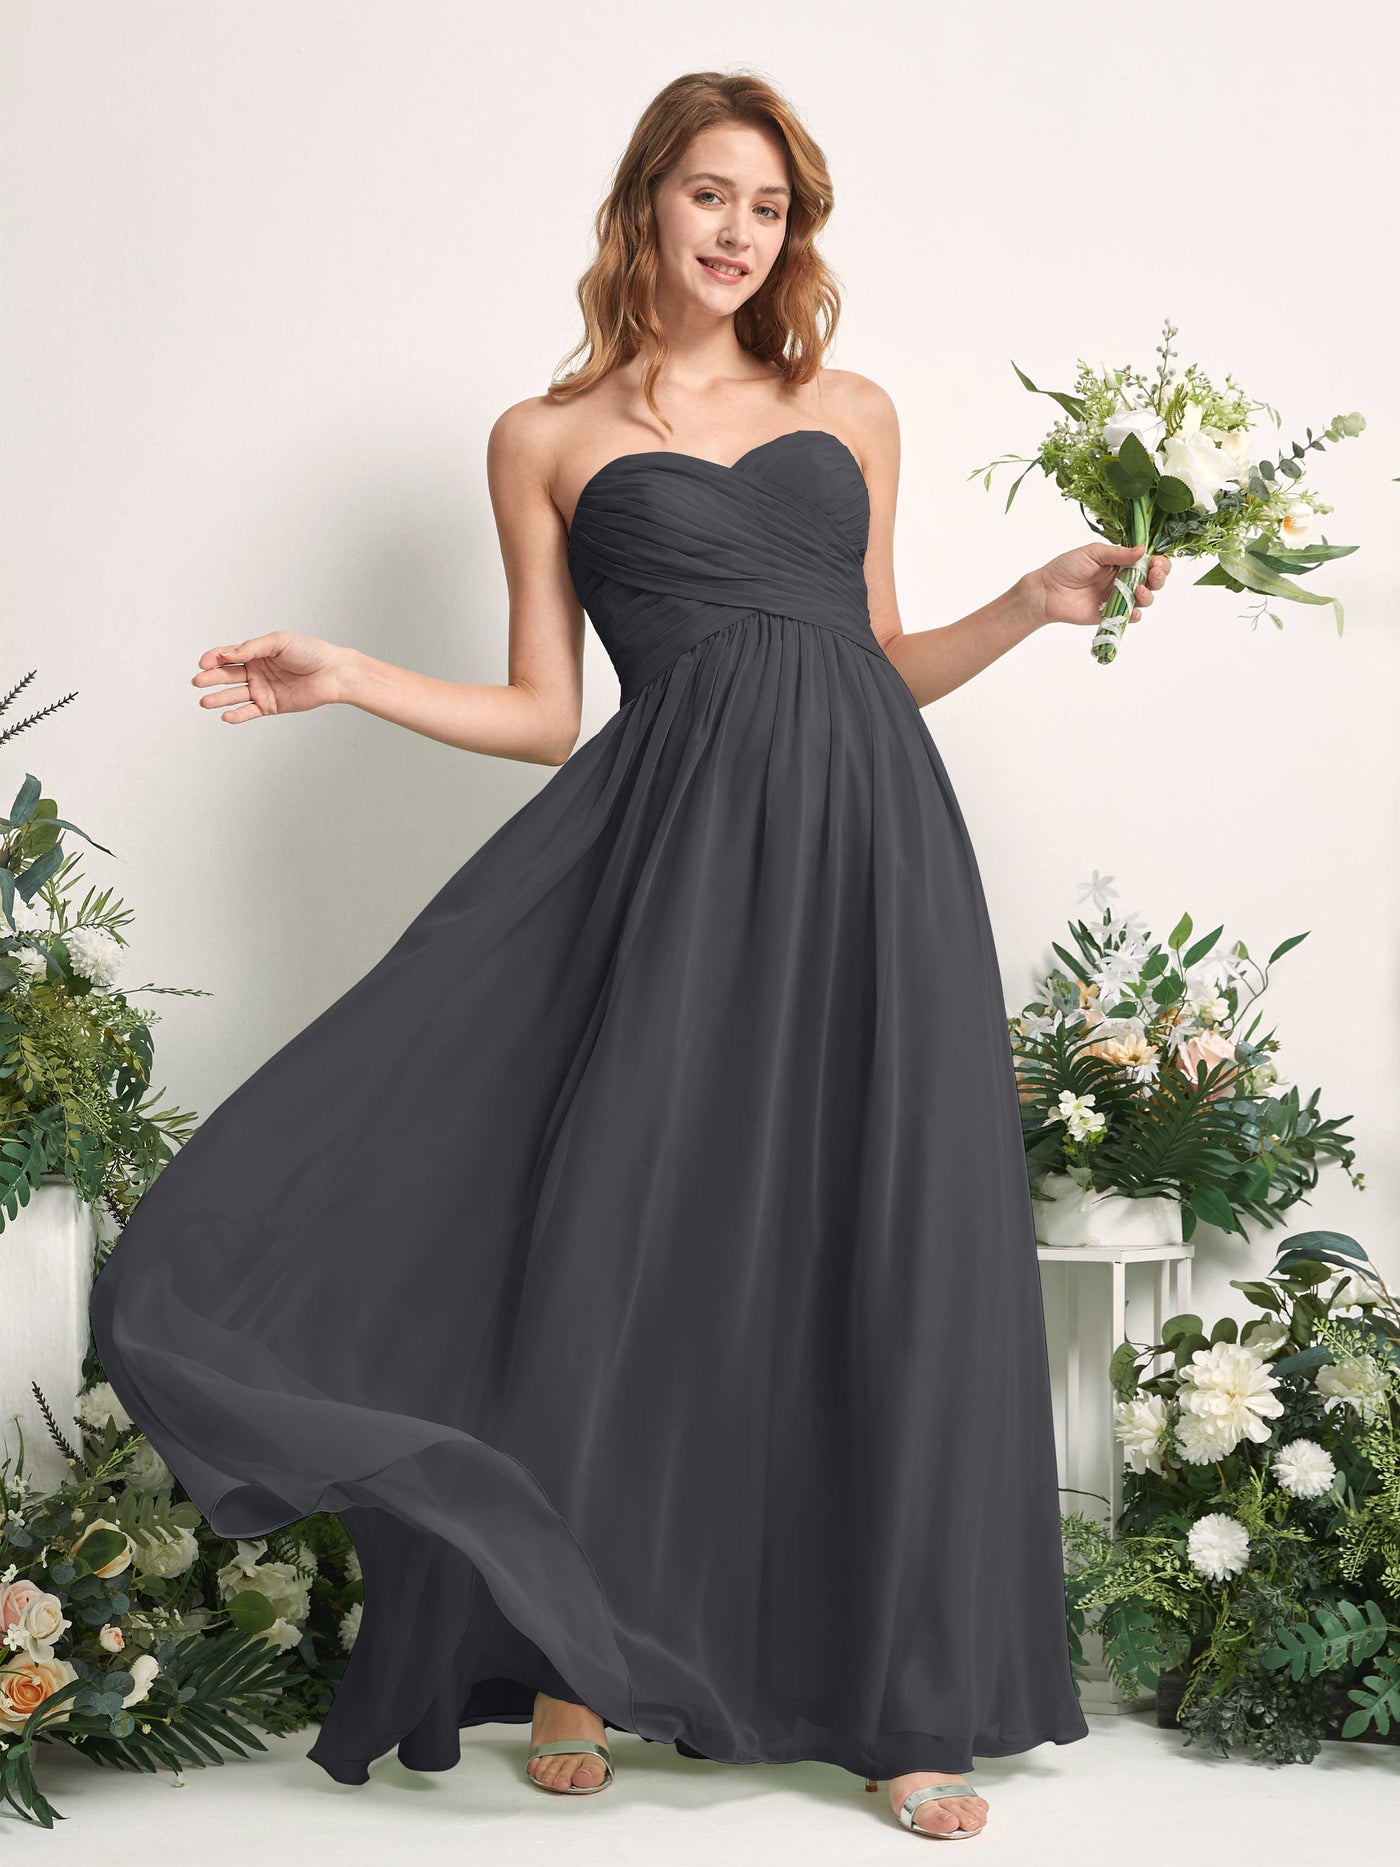 Bridesmaid Dress A-line Chiffon Sweetheart Full Length Sleeveless Wedding Party Dress - Pewter (81226938)#color_pewter